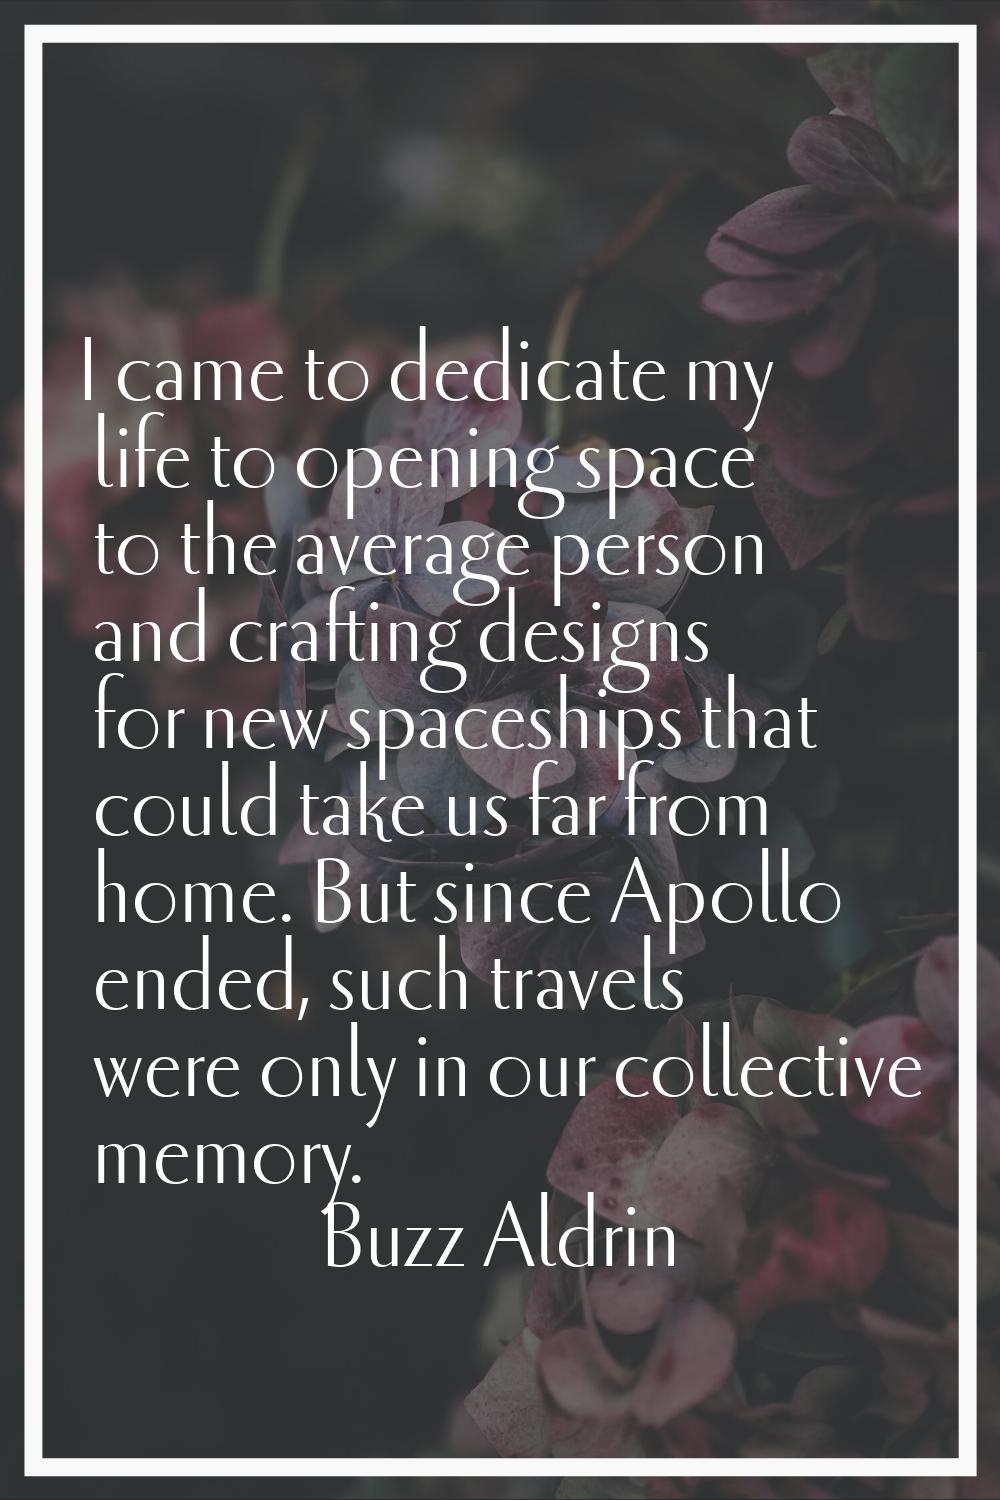 I came to dedicate my life to opening space to the average person and crafting designs for new spac